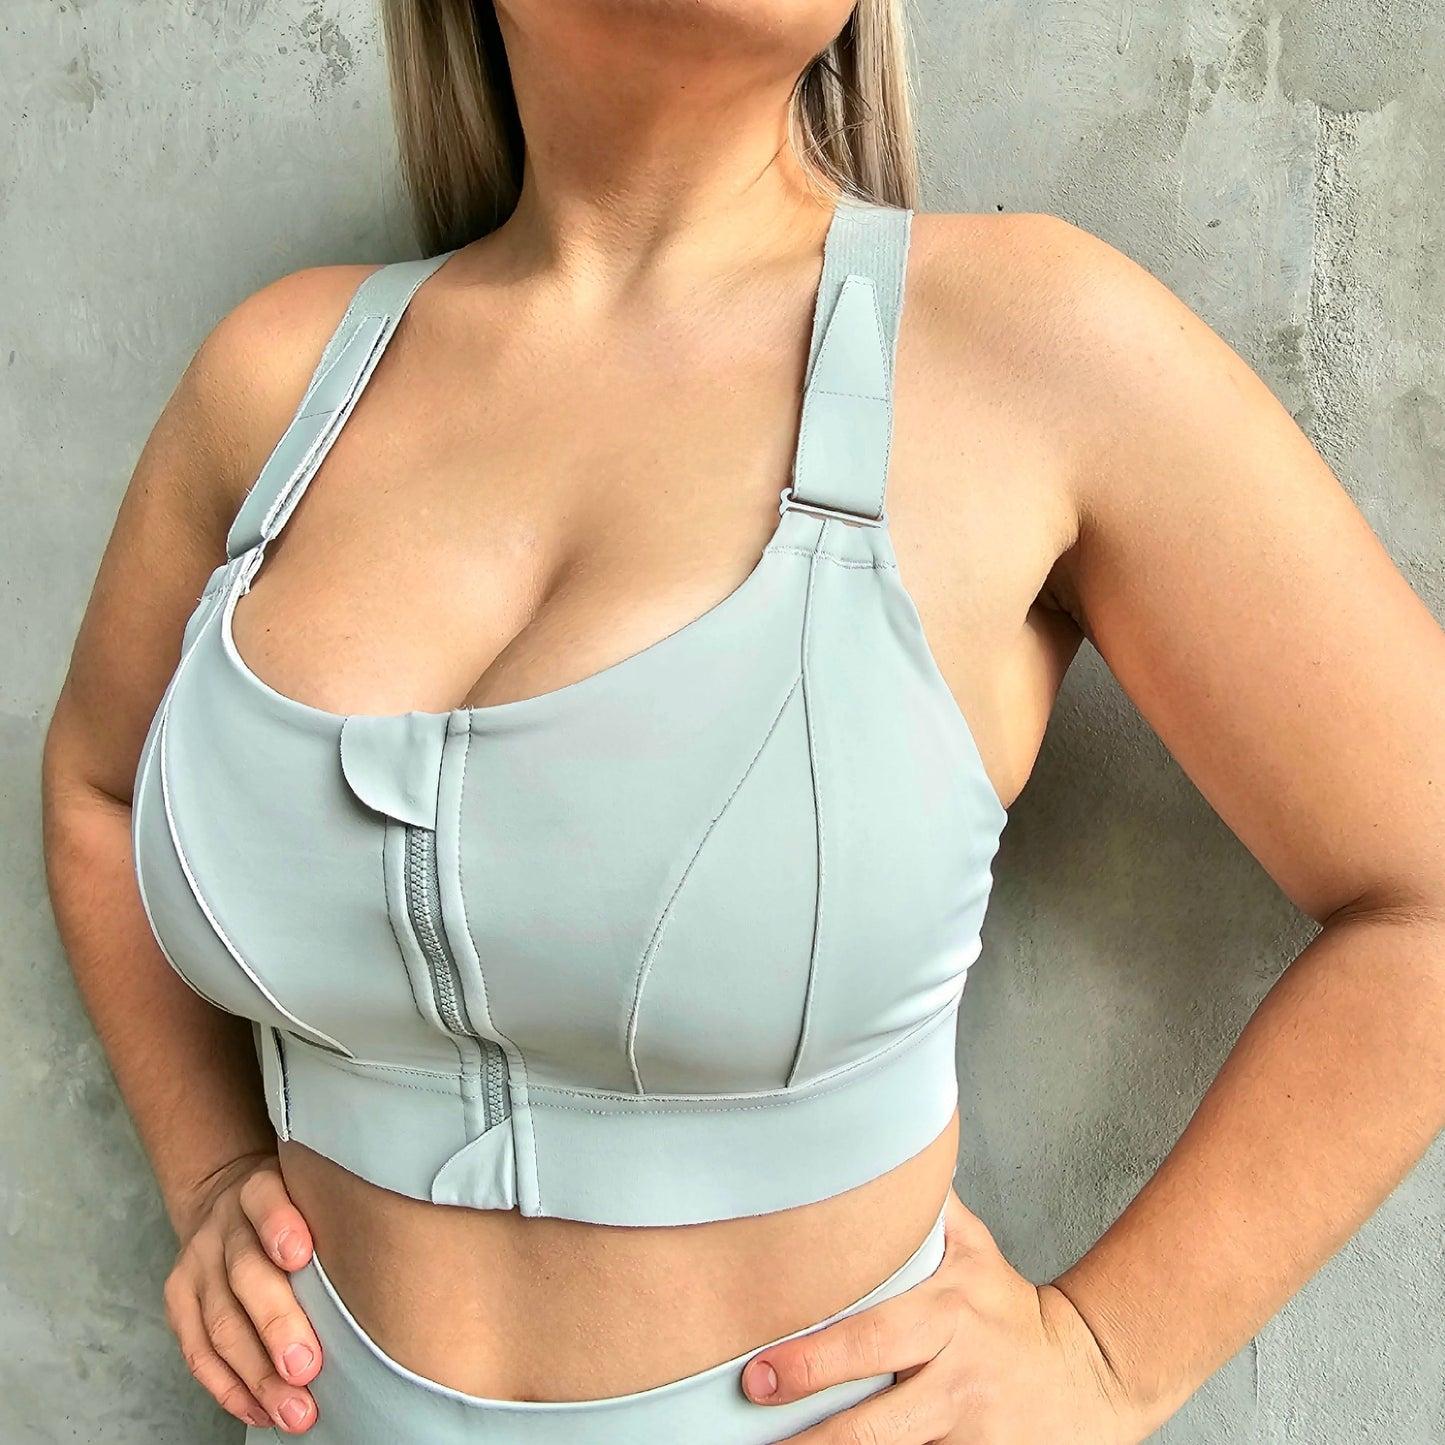 Fitness model wearing a light green, adjustable and high impact sports bra from Vibras Activewear.